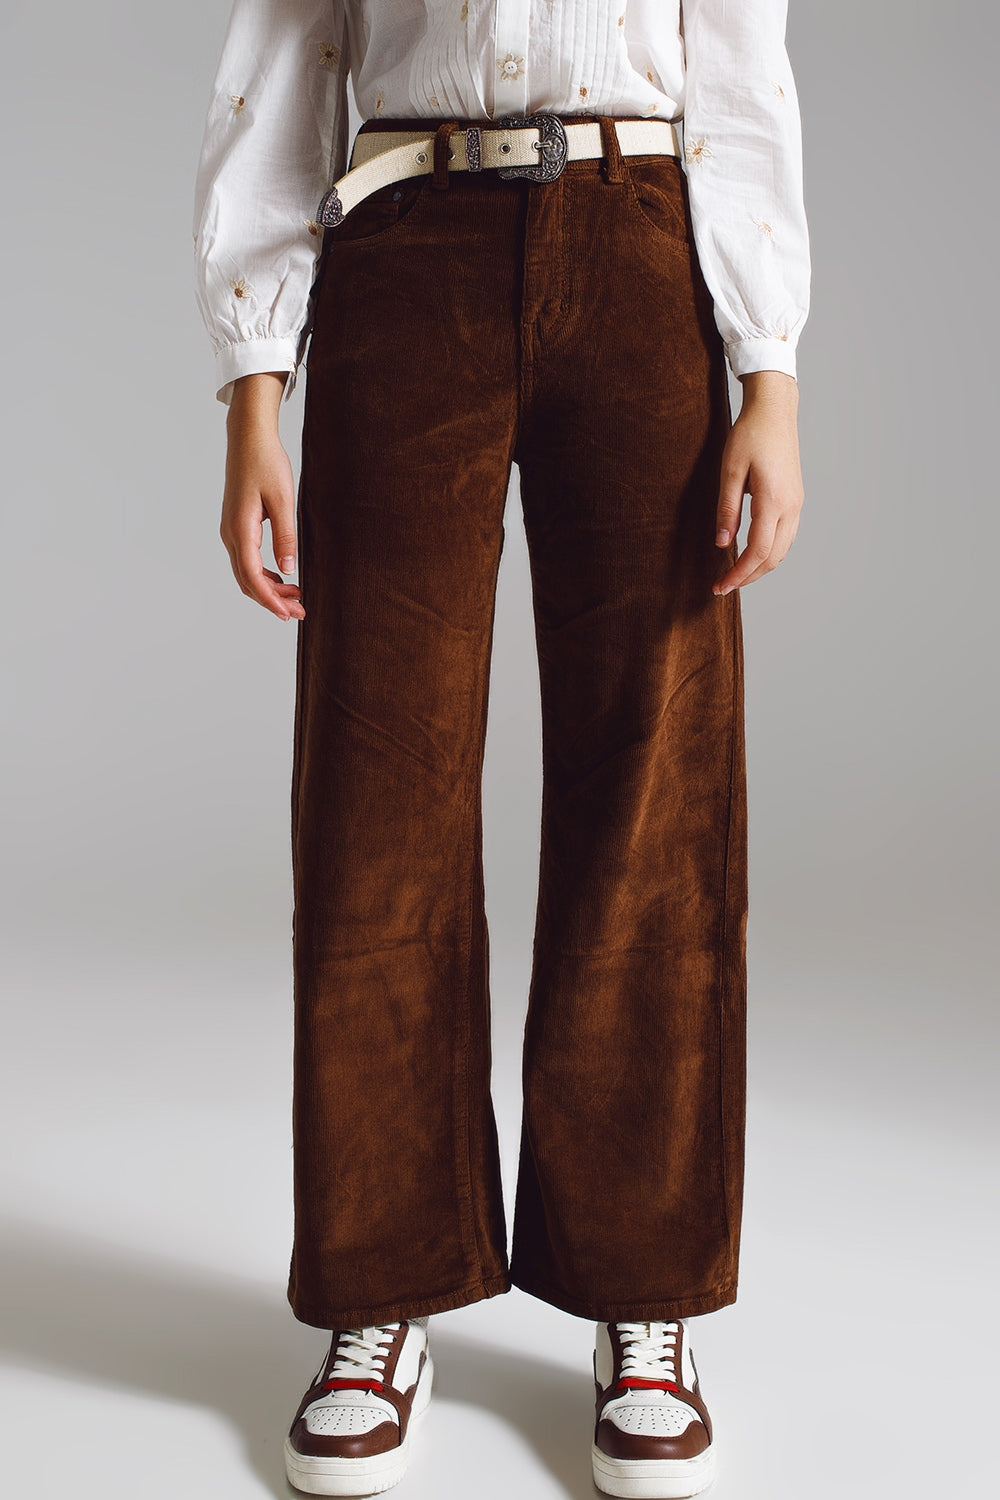 Q2 Cropped cord pants in brown